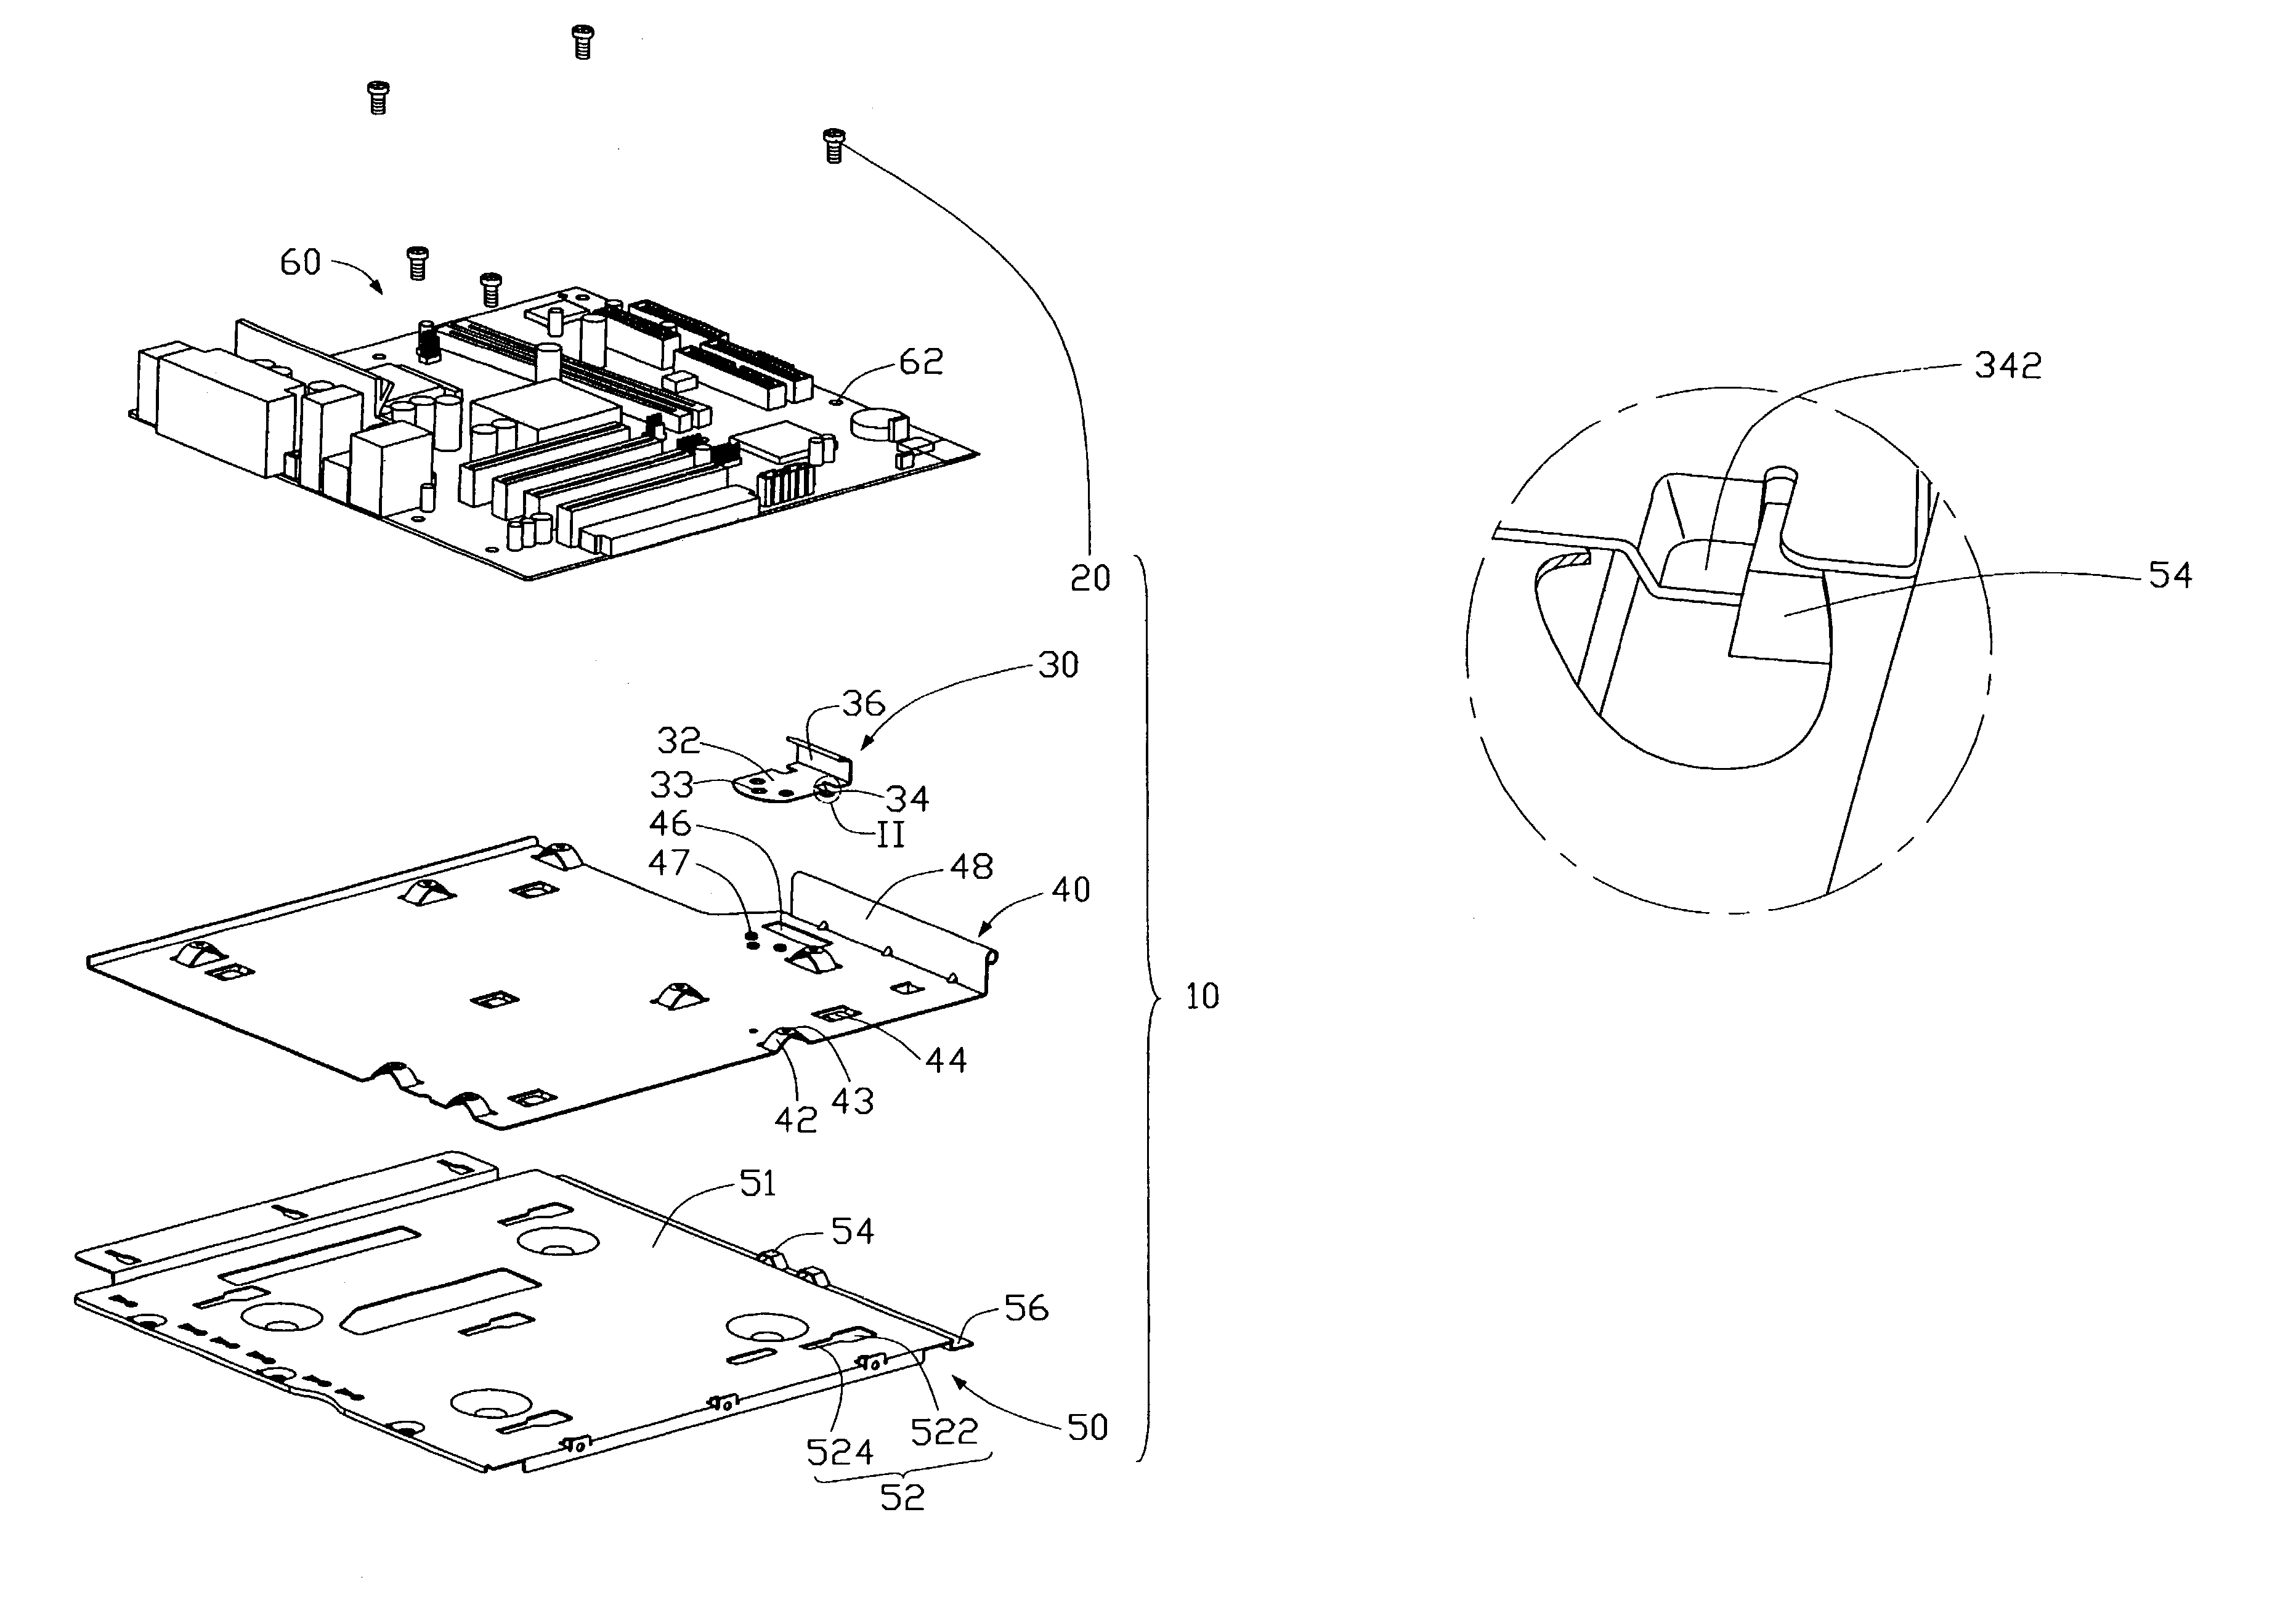 Mounting apparatus for circuit board